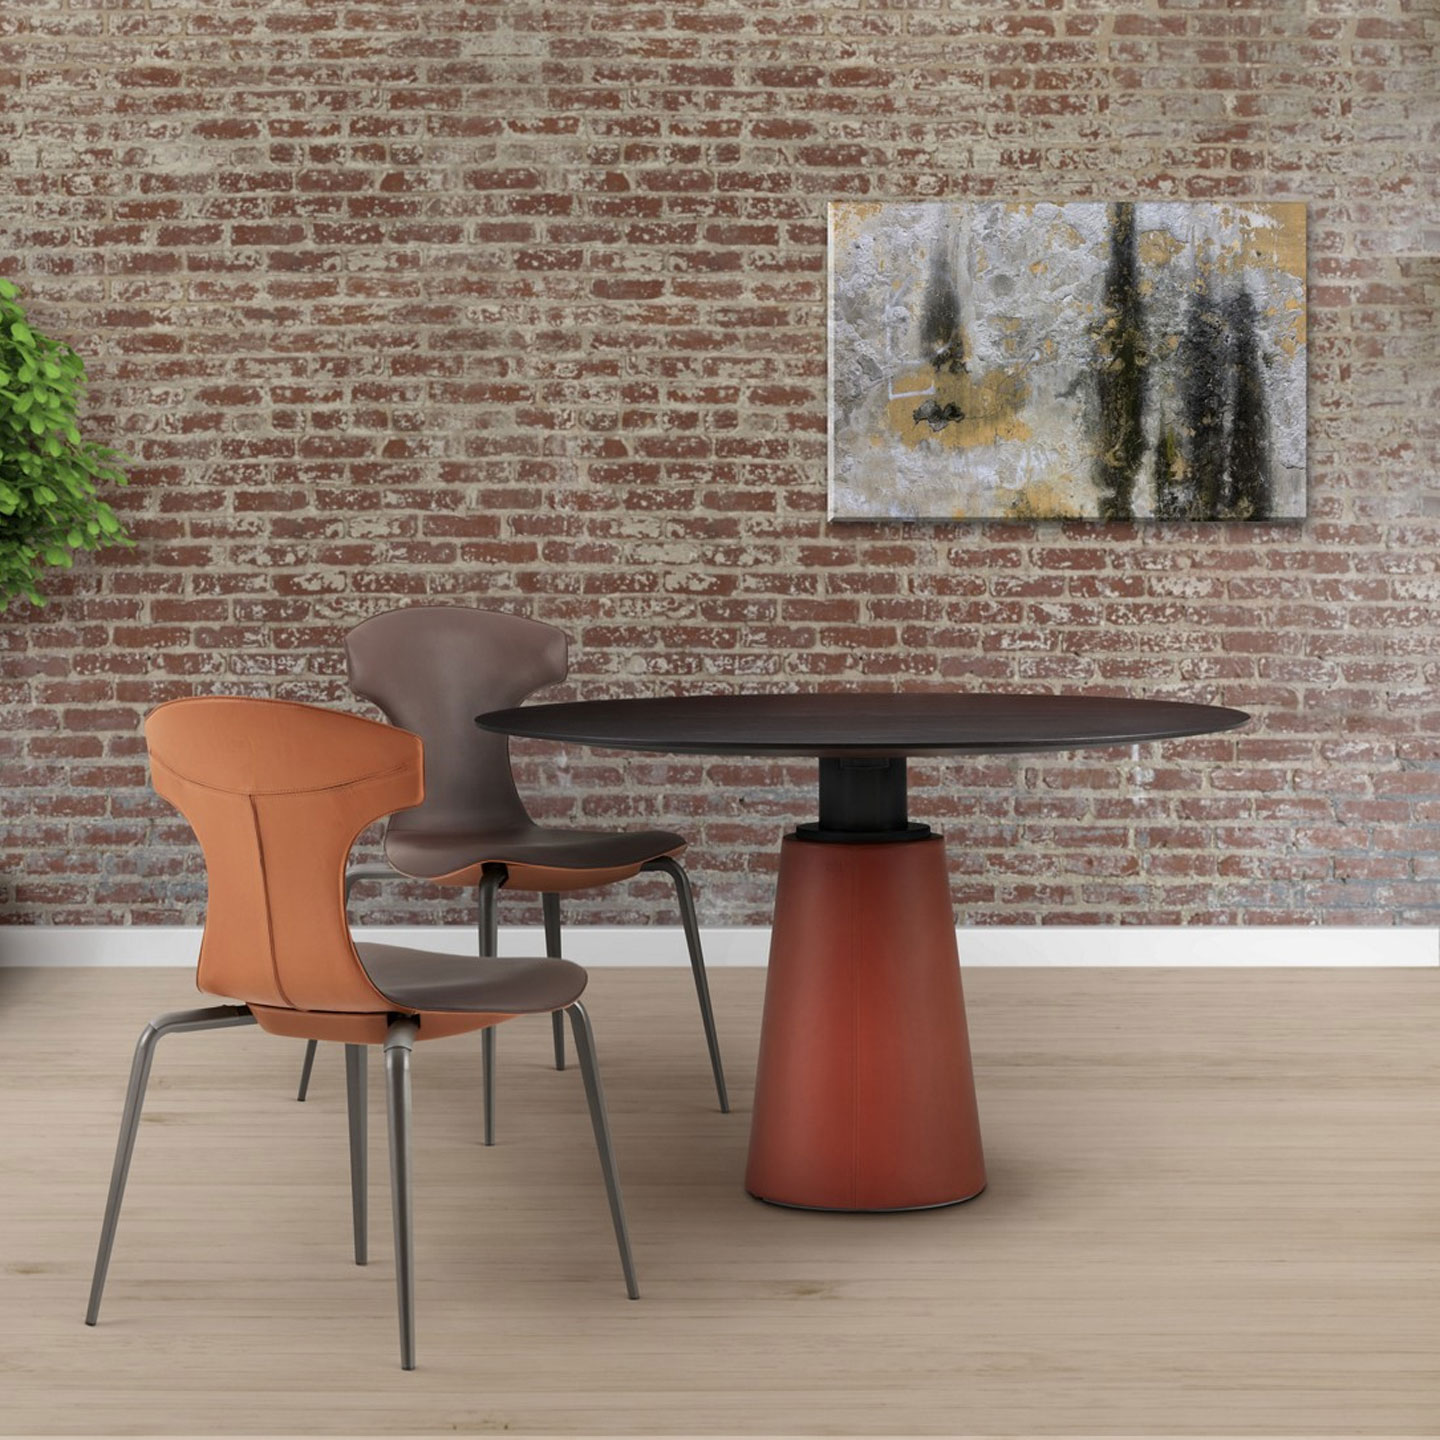 Haworth Mesa Due Table with Wenge Stained Ash circular top and circular base in a social set up with brick walls